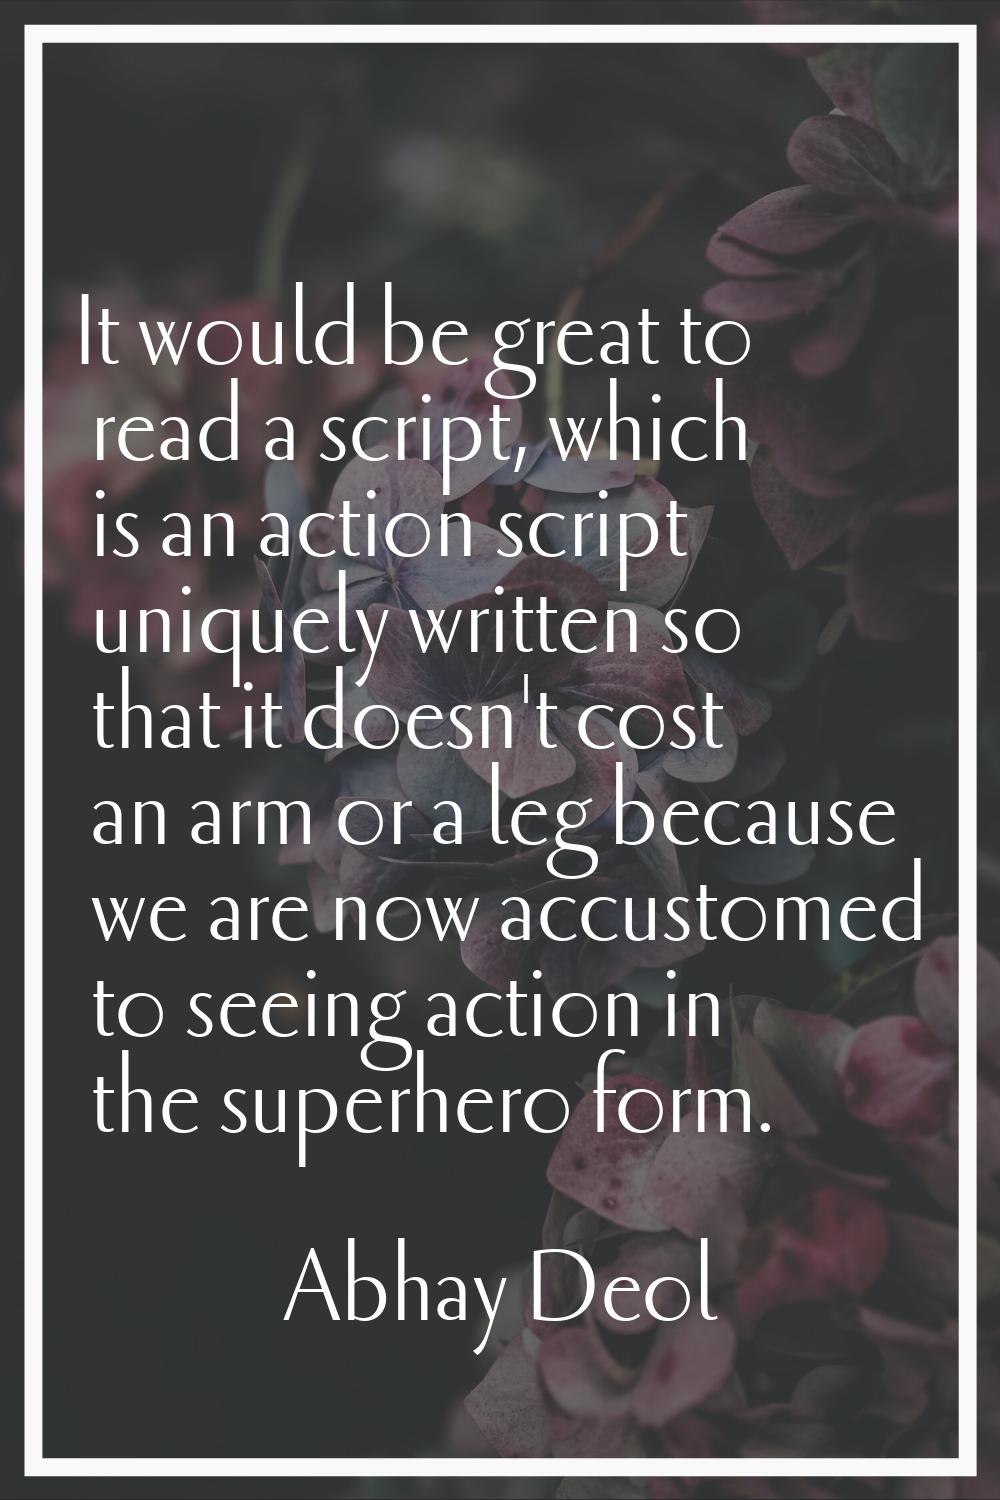 It would be great to read a script, which is an action script uniquely written so that it doesn't c